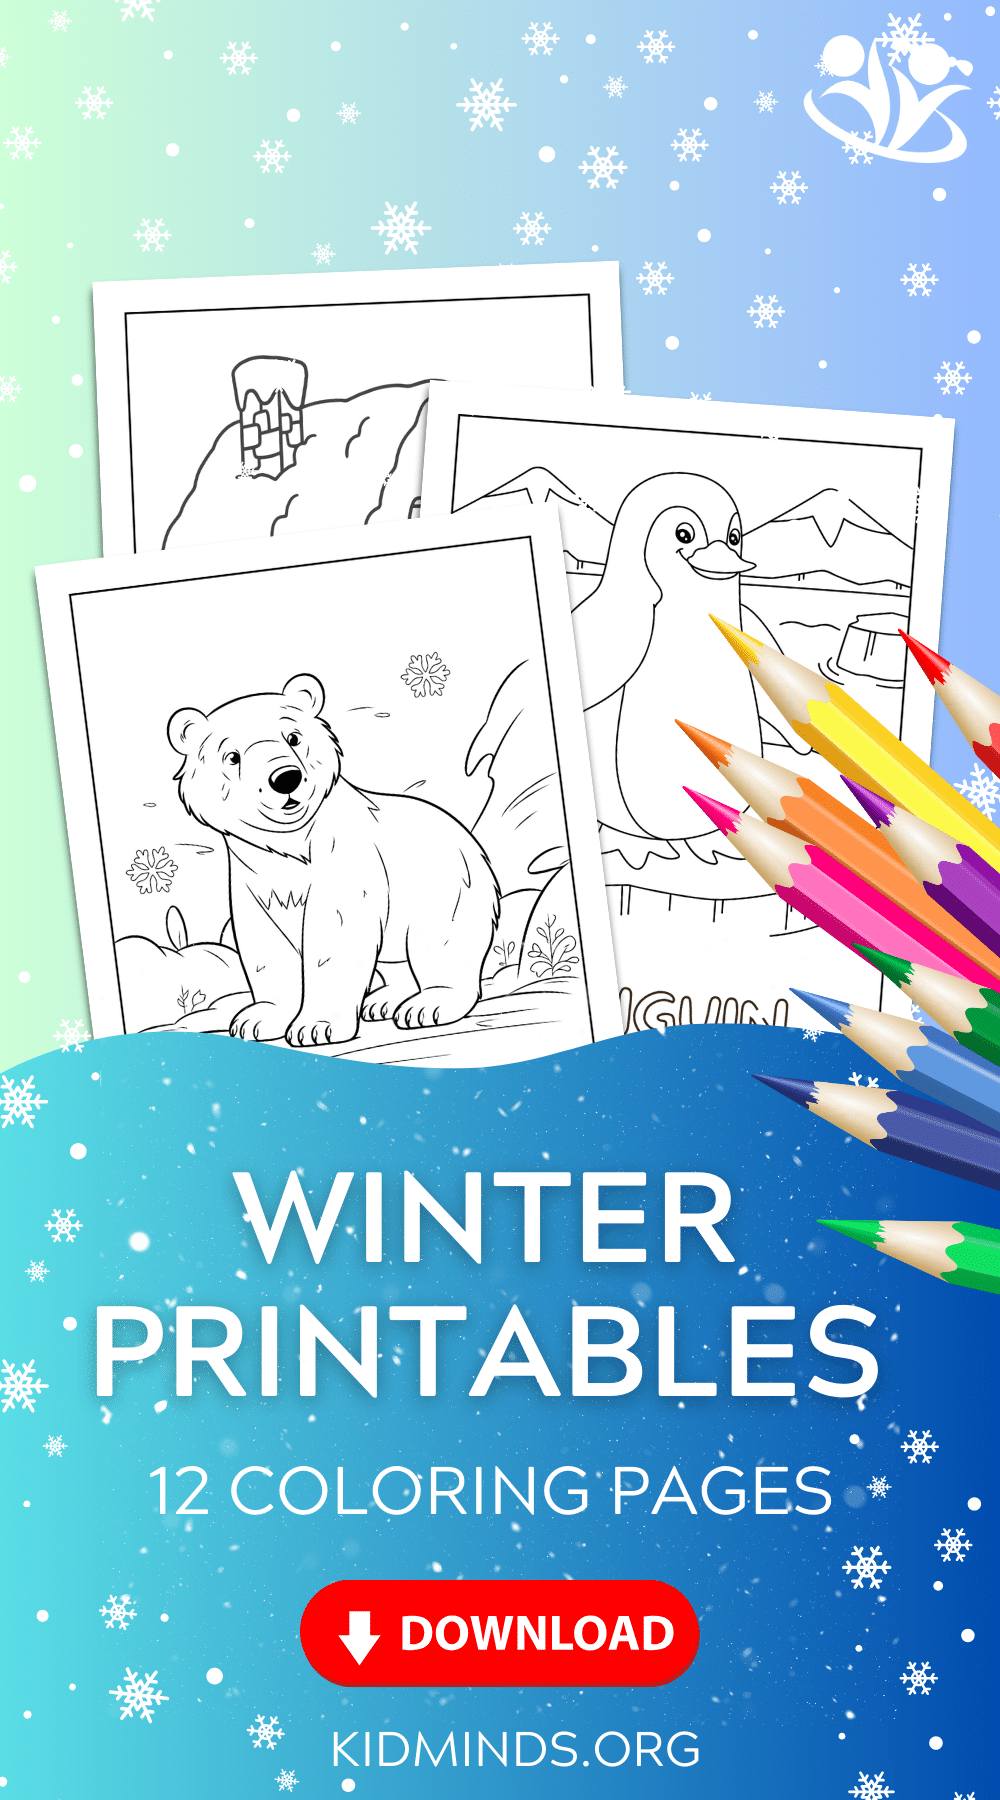 Our winter coloring pages are perfect for keeping kids entertained and engaged when it’s too cold to play outside.  #kidsactivities #winterfun #freeprintables #coloringpages #winter #kidminds